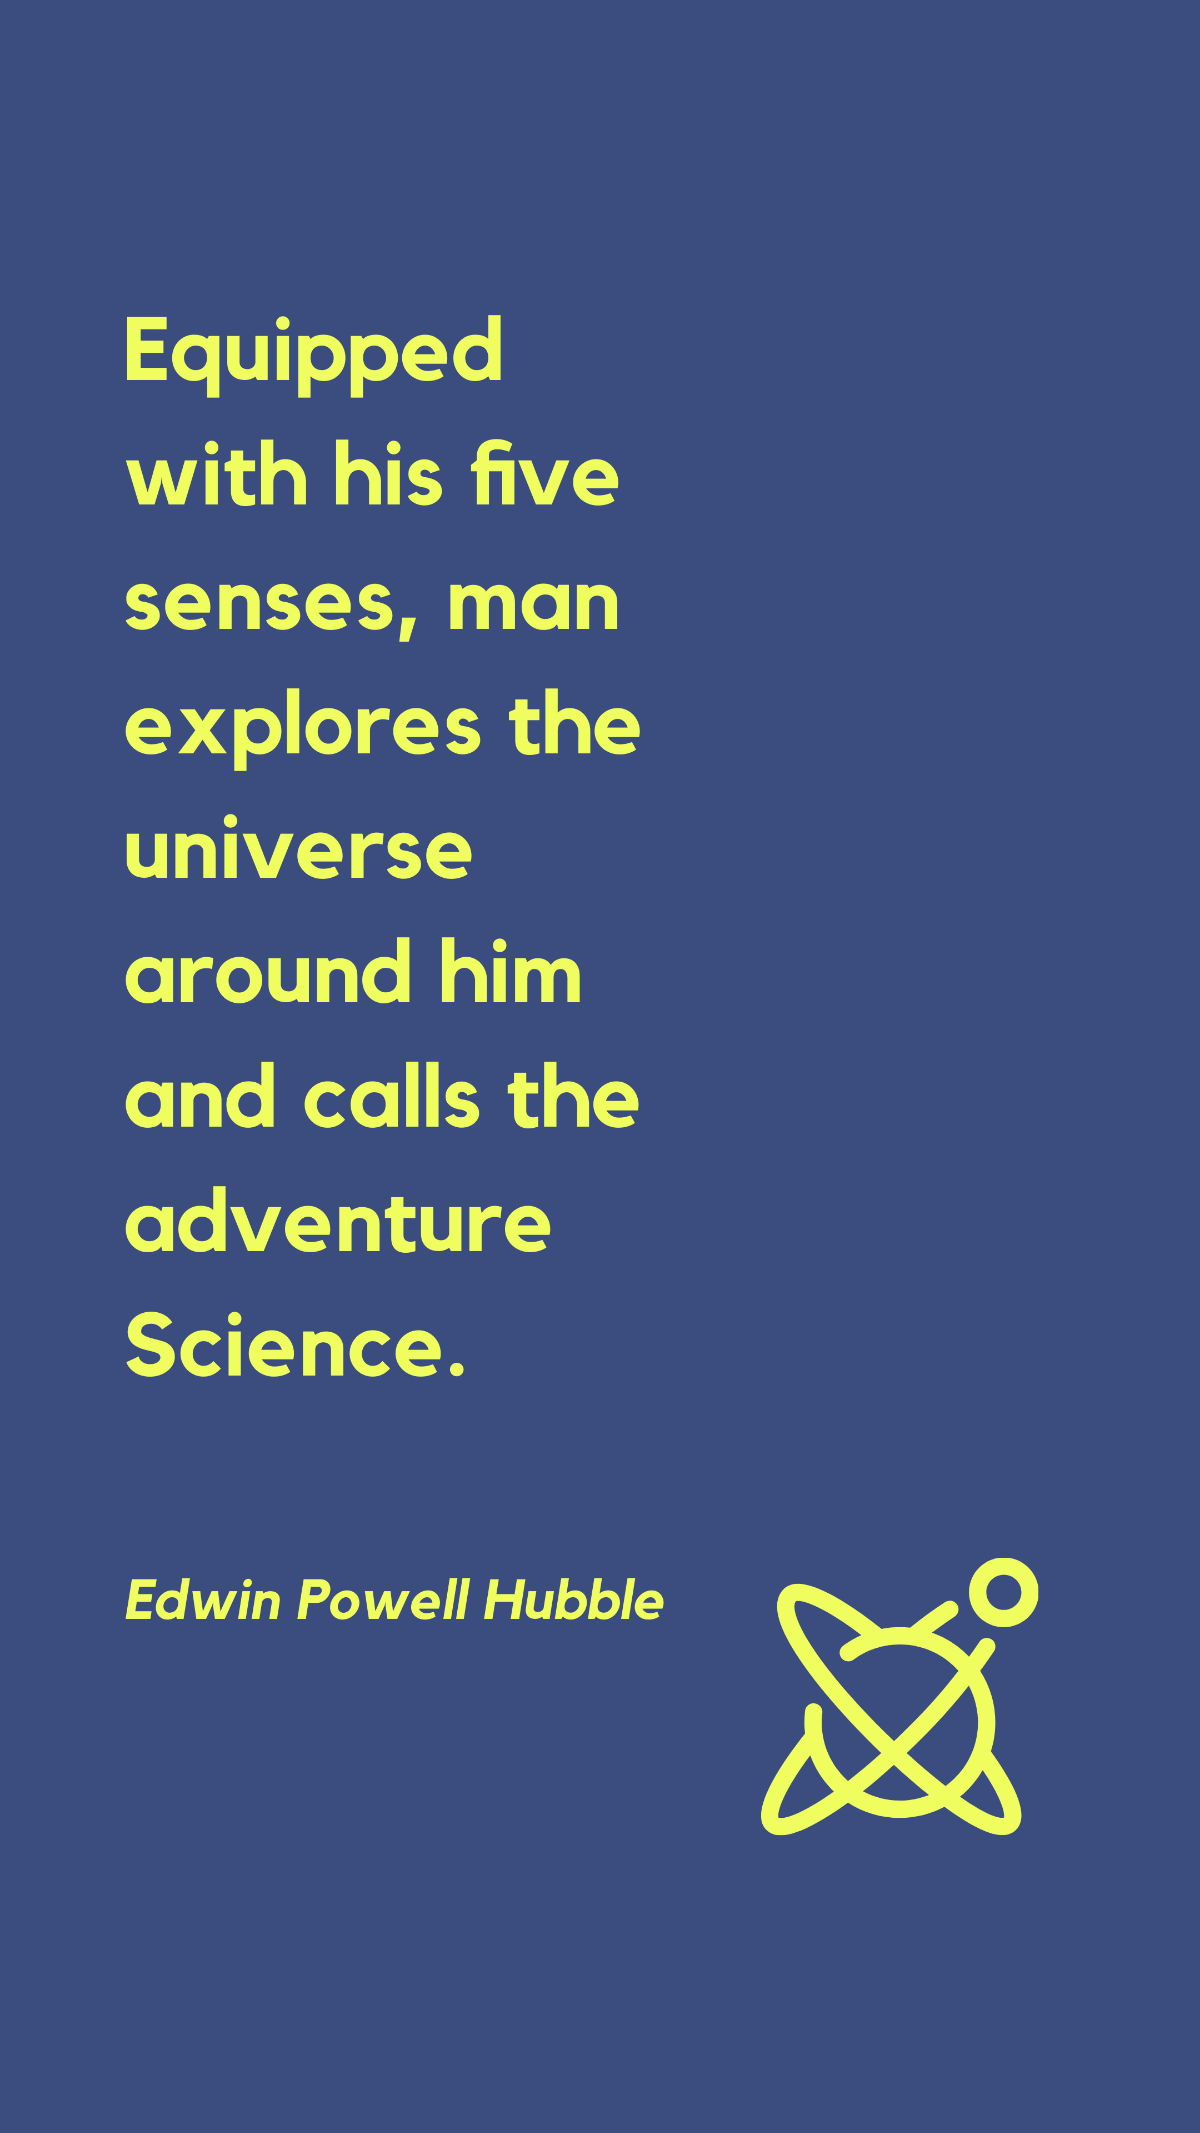 Edwin Powell Hubble - Equipped with his five senses, man explores the universe around him and calls the adventure Science. Template